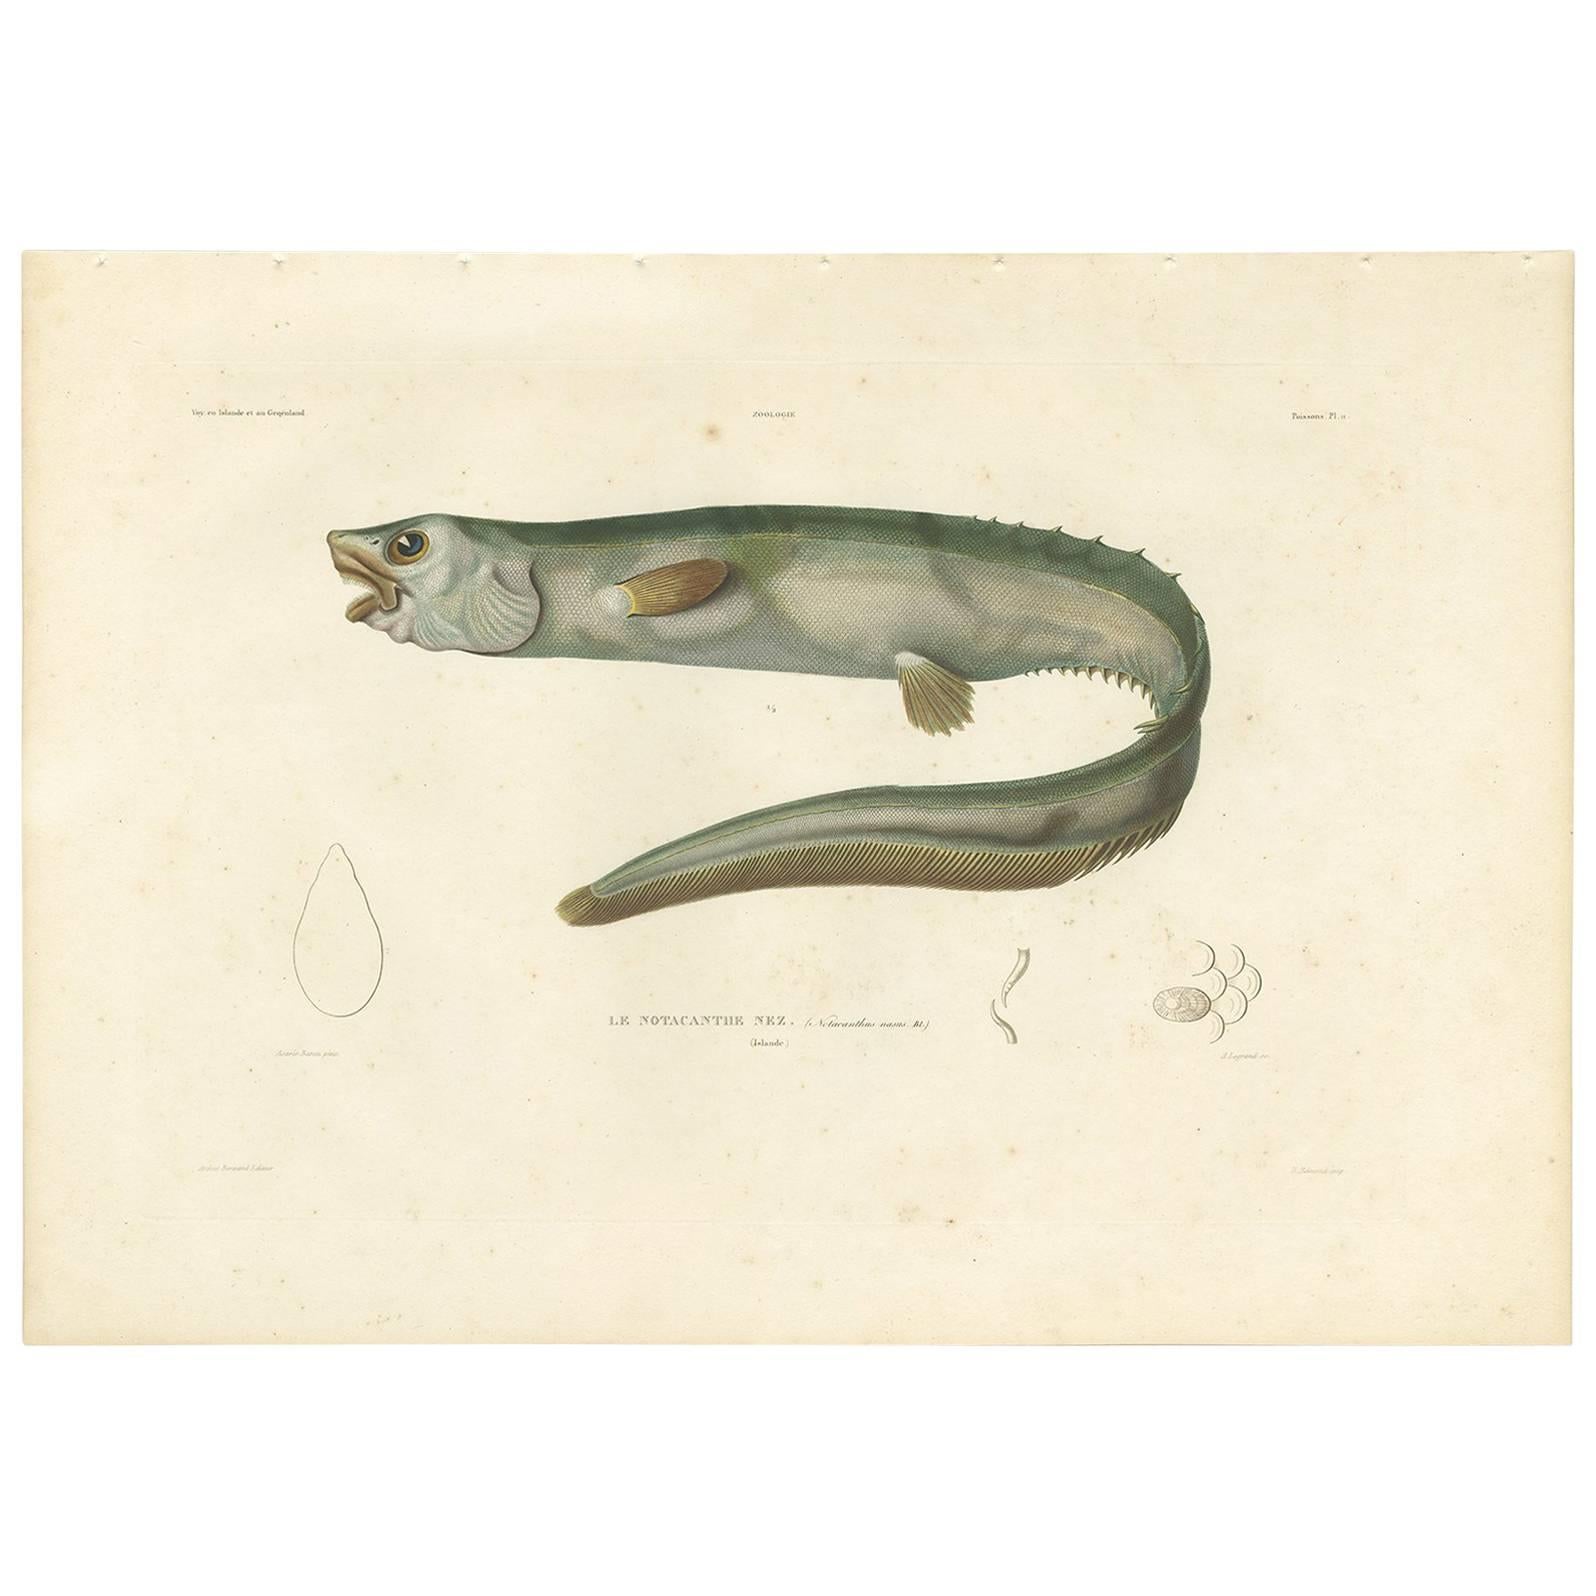 Antique Fish Print of the Snub-Nosed Spiny Eel by M.P. Gaimard, 1842